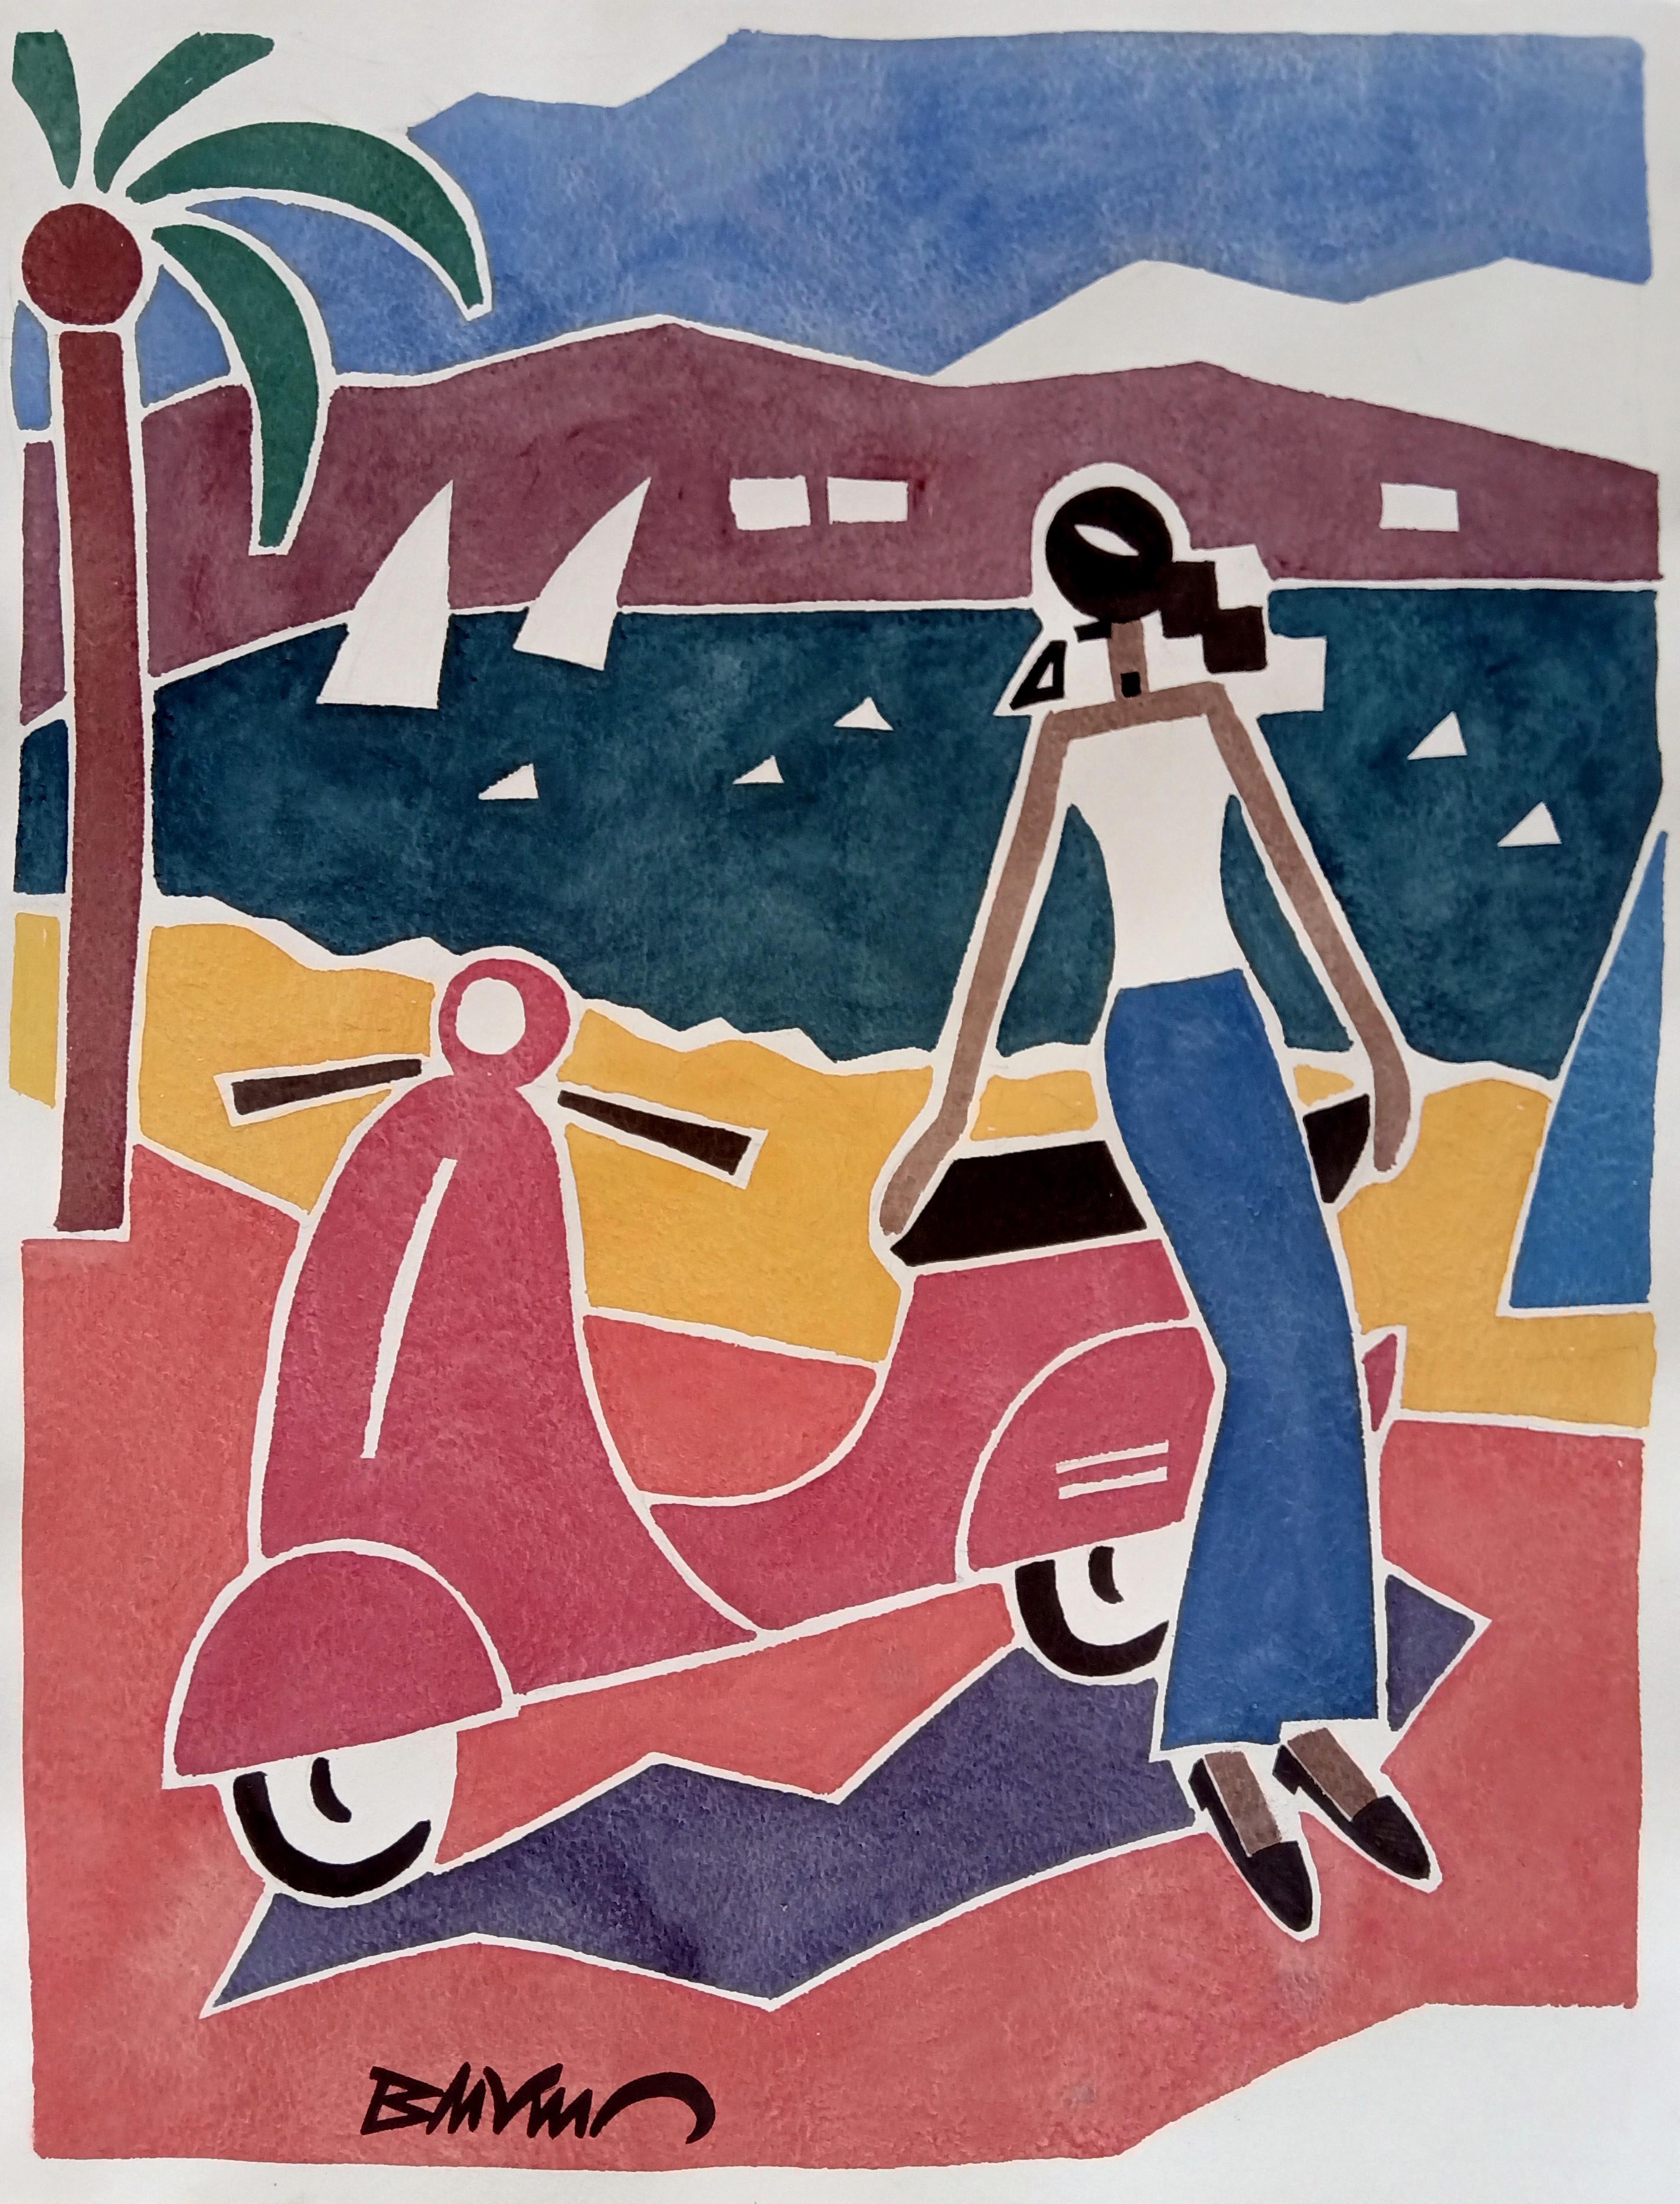 "Women on scooter" figurative drawing, watercolors ink on paper